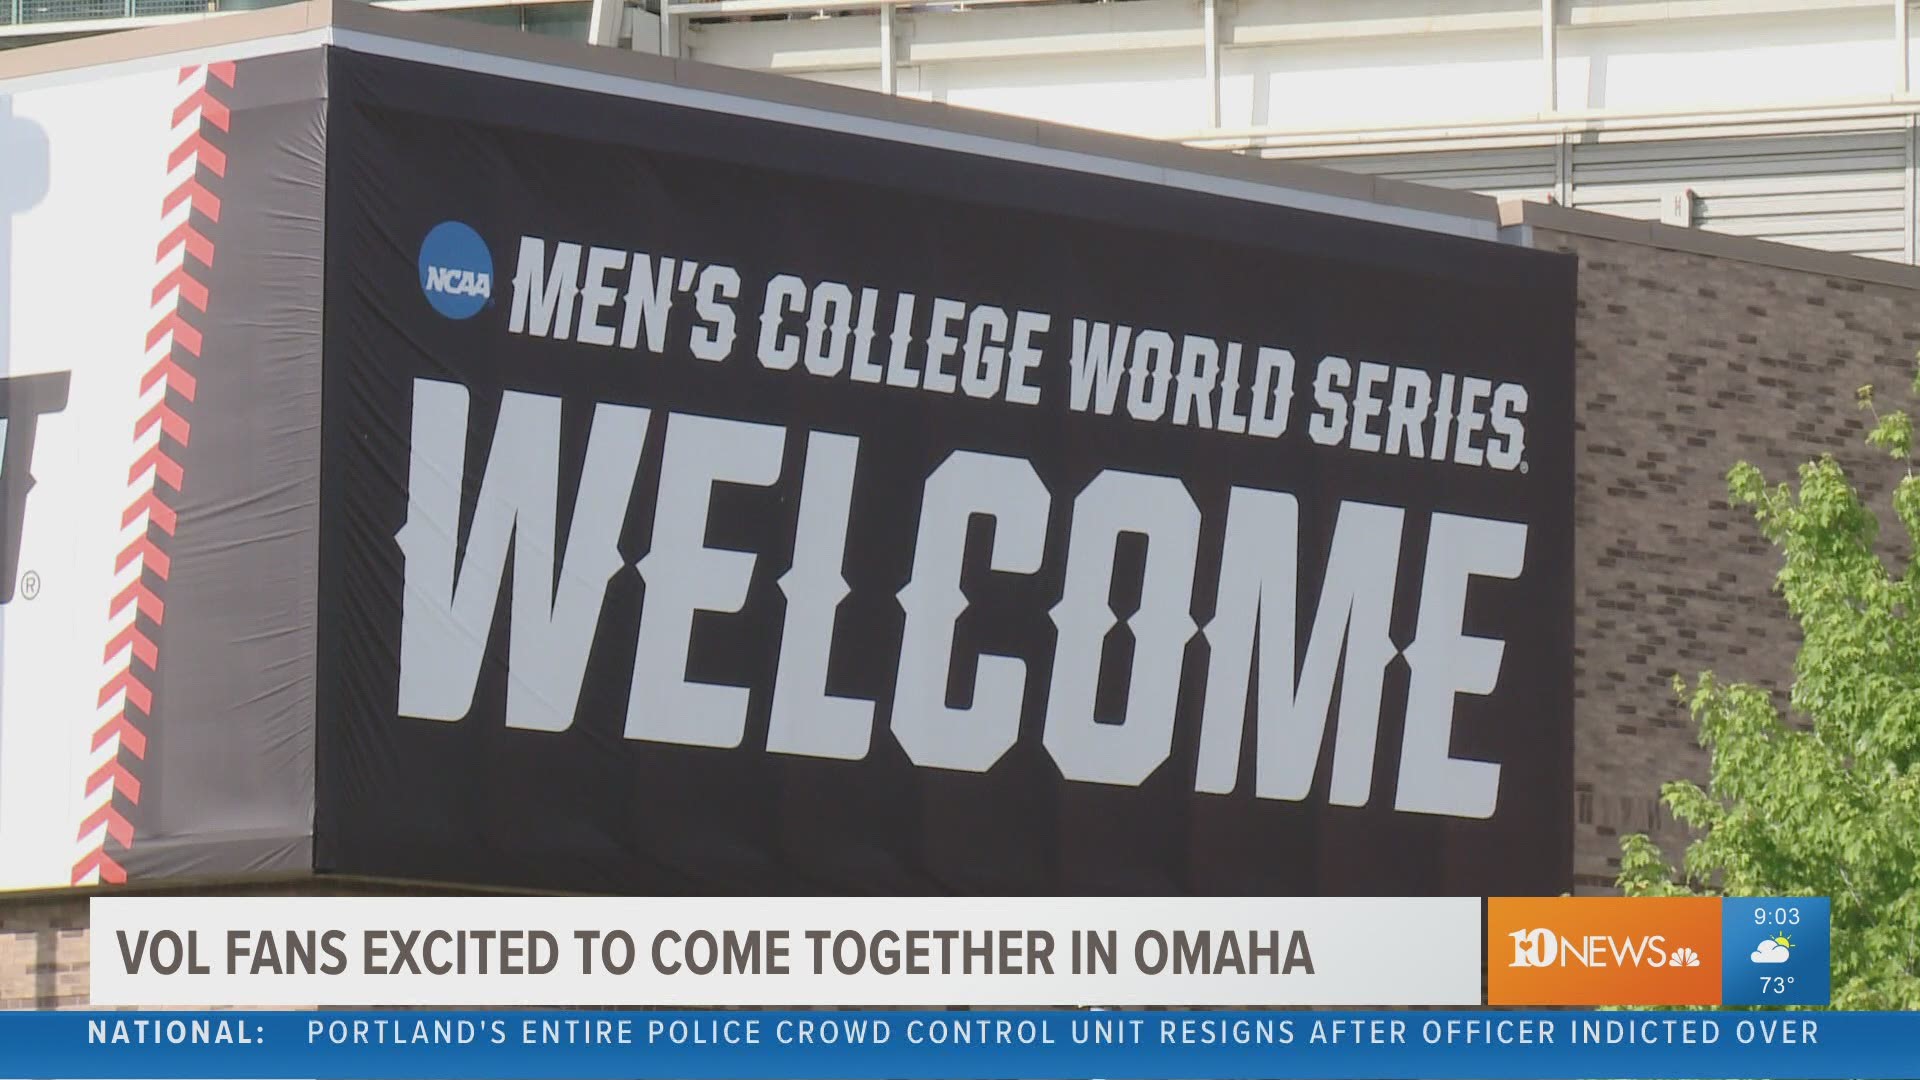 Tennessee head coach Tony Vitello encouraged Vol fans to drive the 920 miles from Knoxville to Omaha to cheer on UT in its first College World Series since 2005.